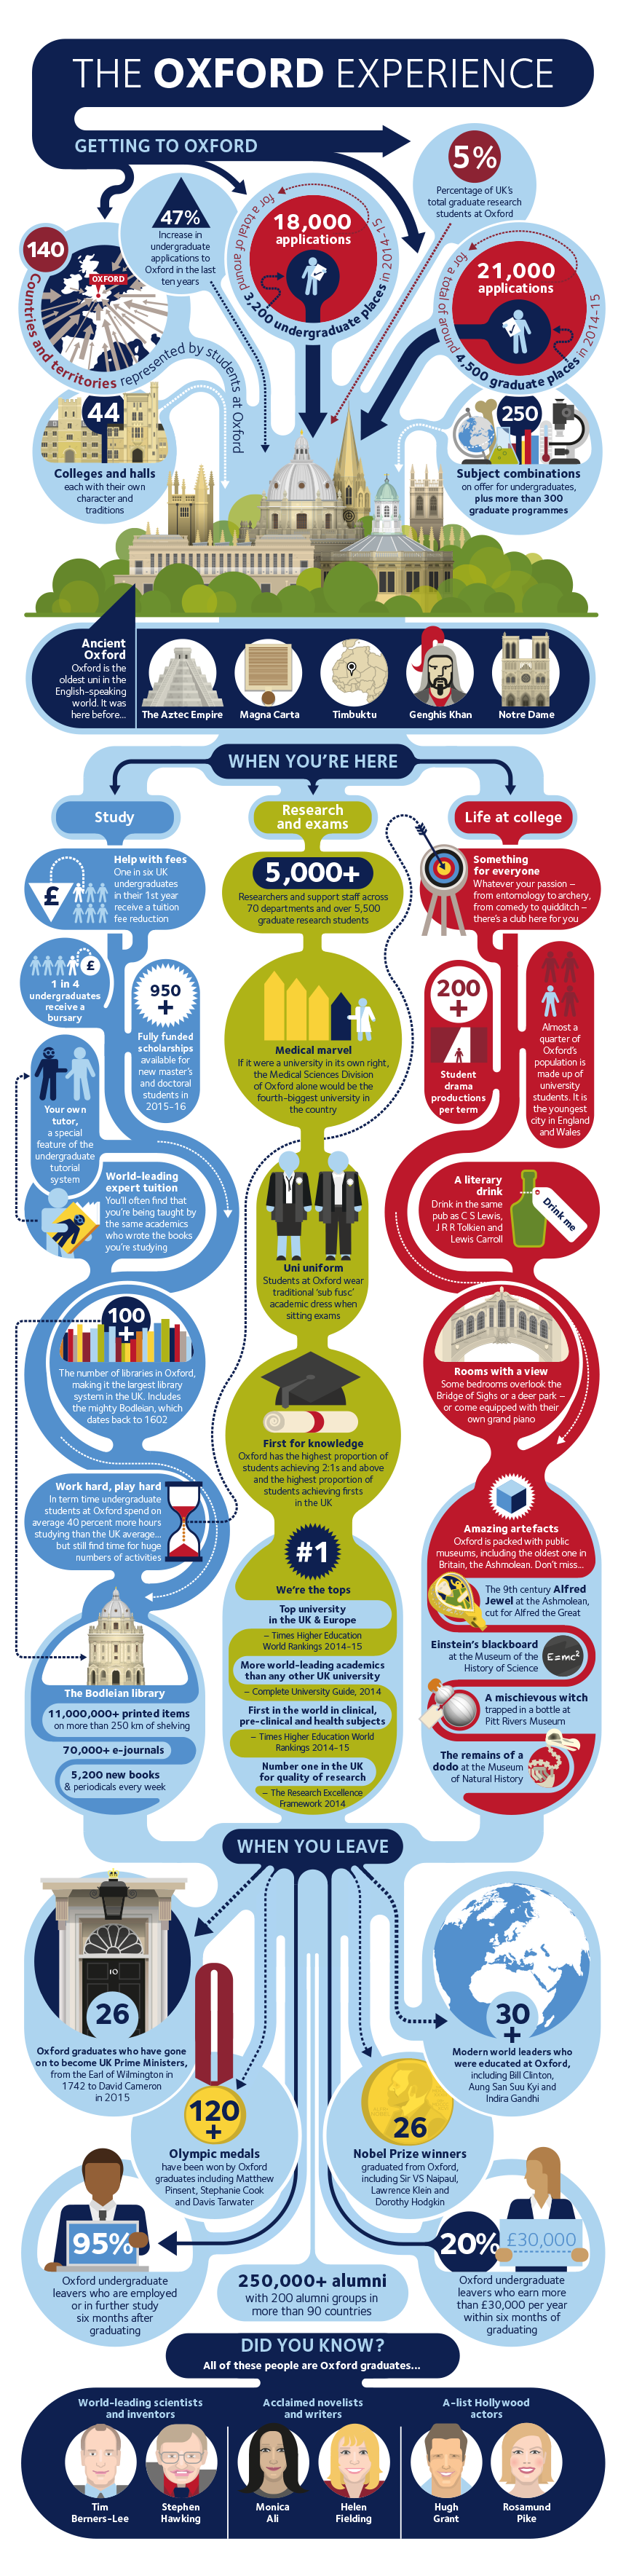 The Oxford Experience infographic